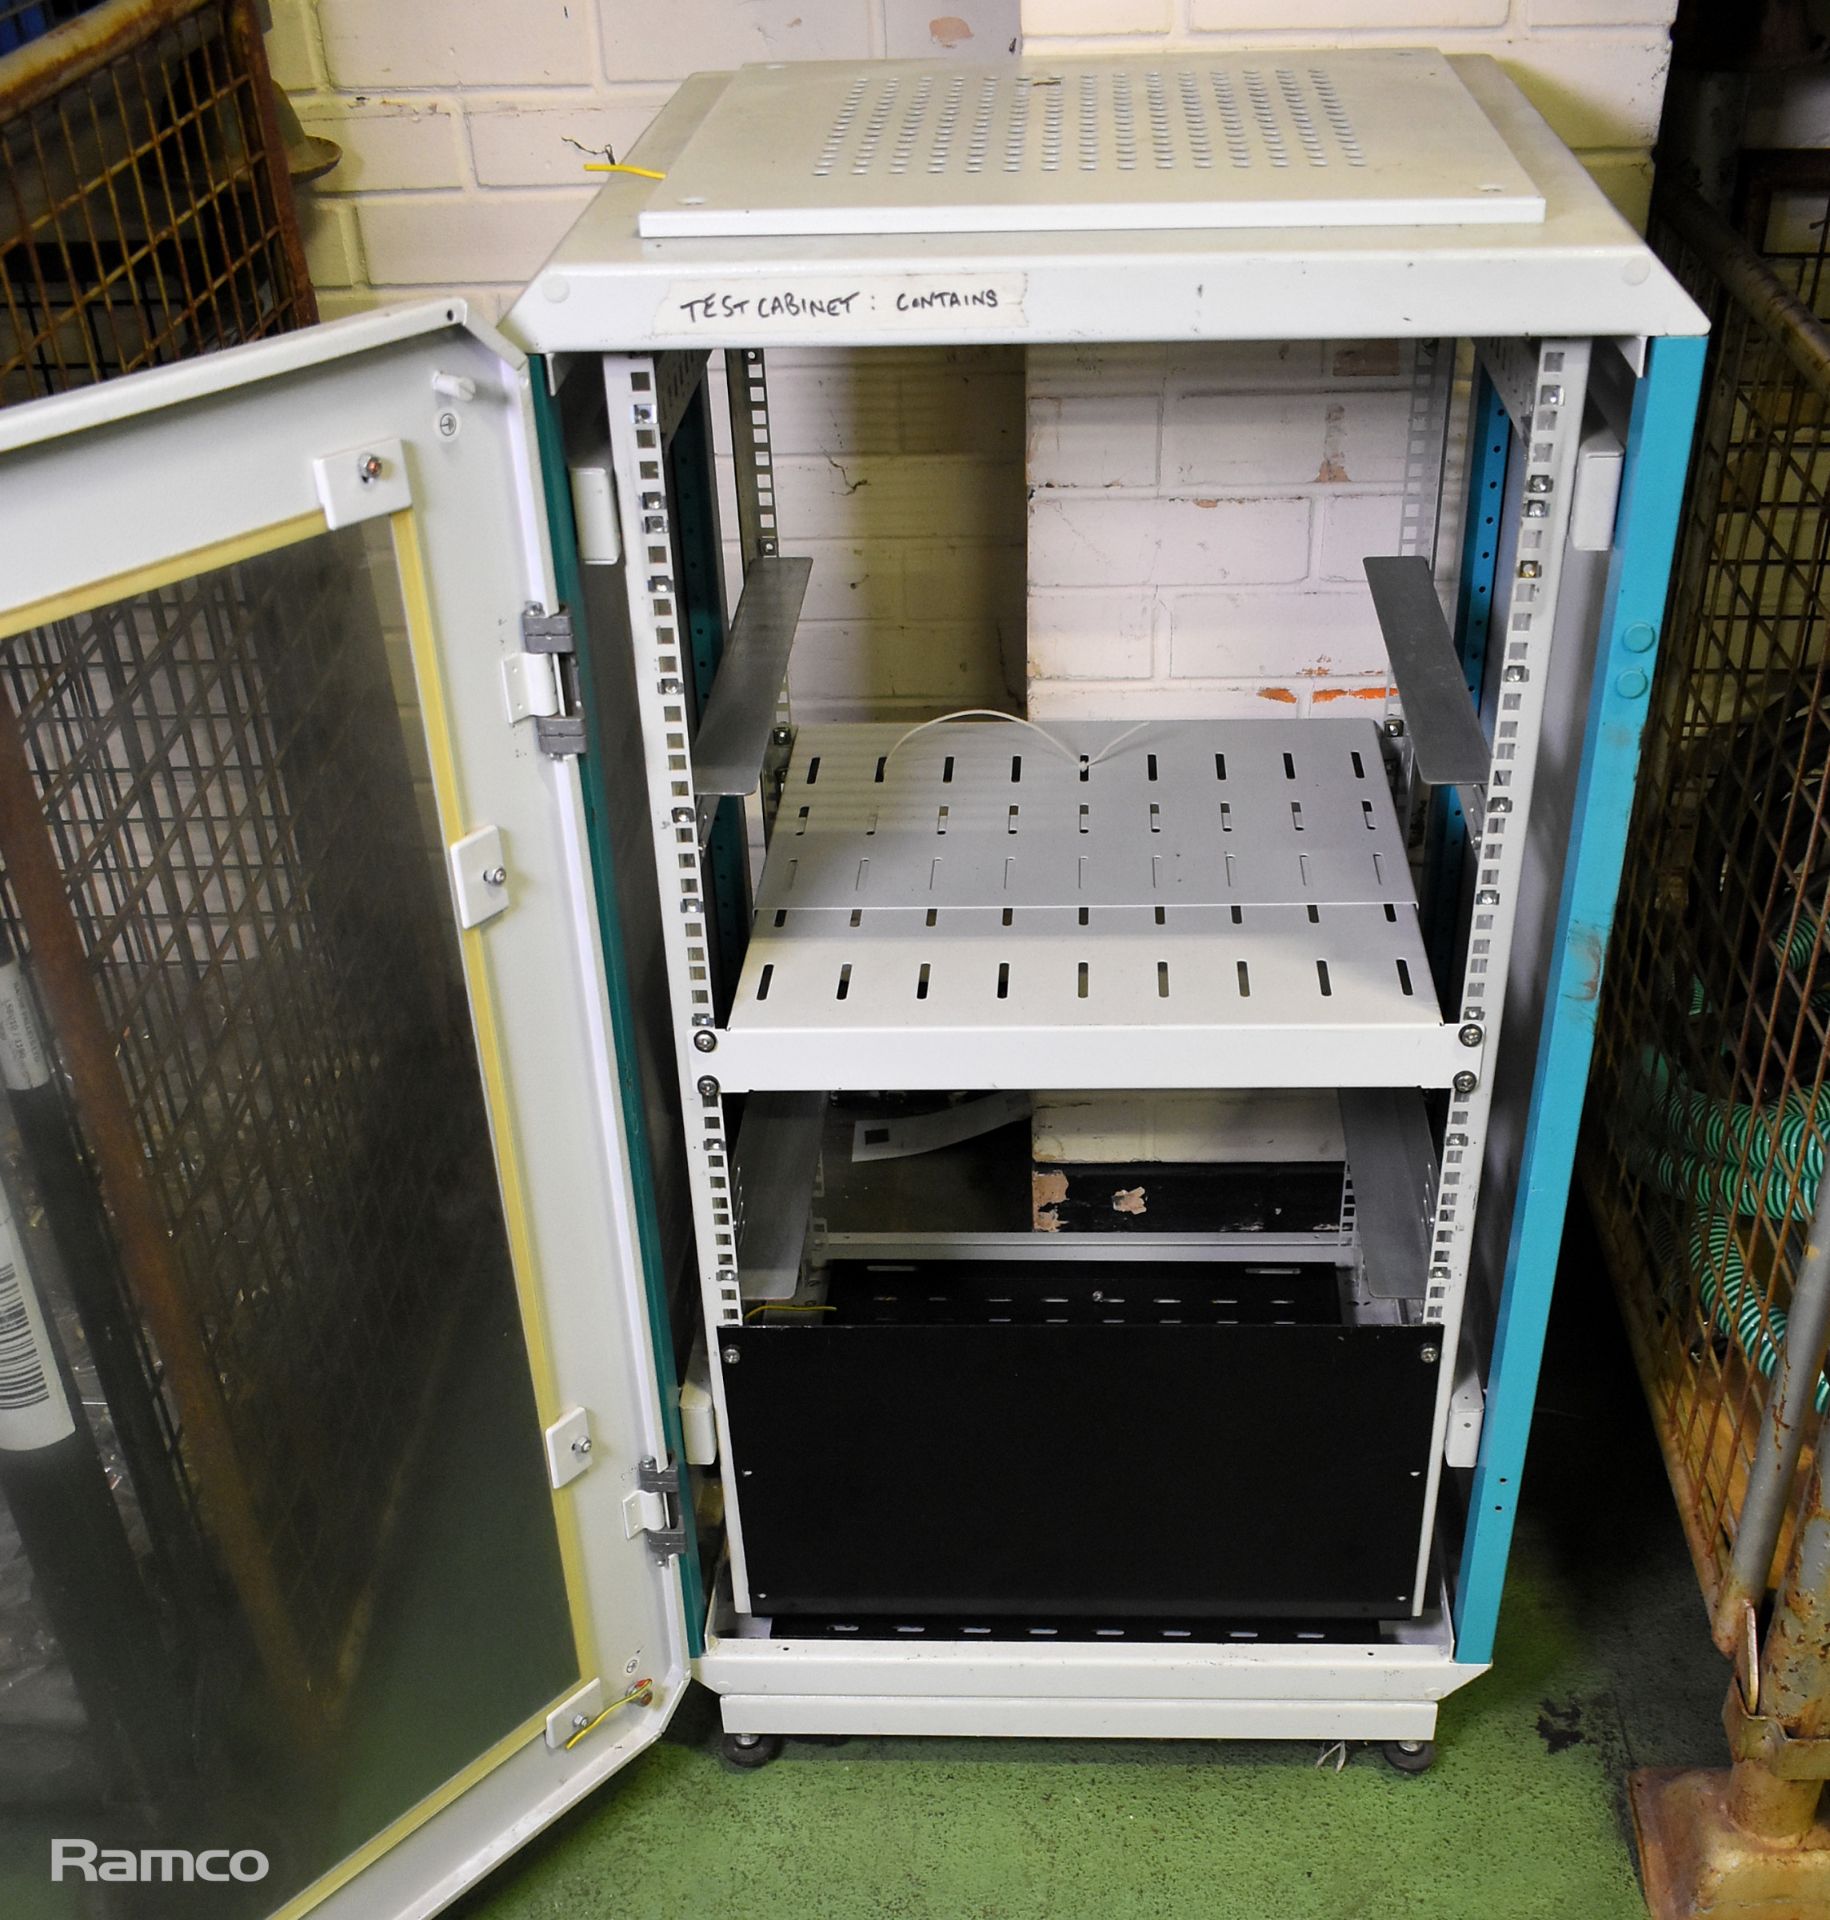 Rittal mobile server cabinet - W 600 x D 658 x H 1060mm - Image 3 of 6